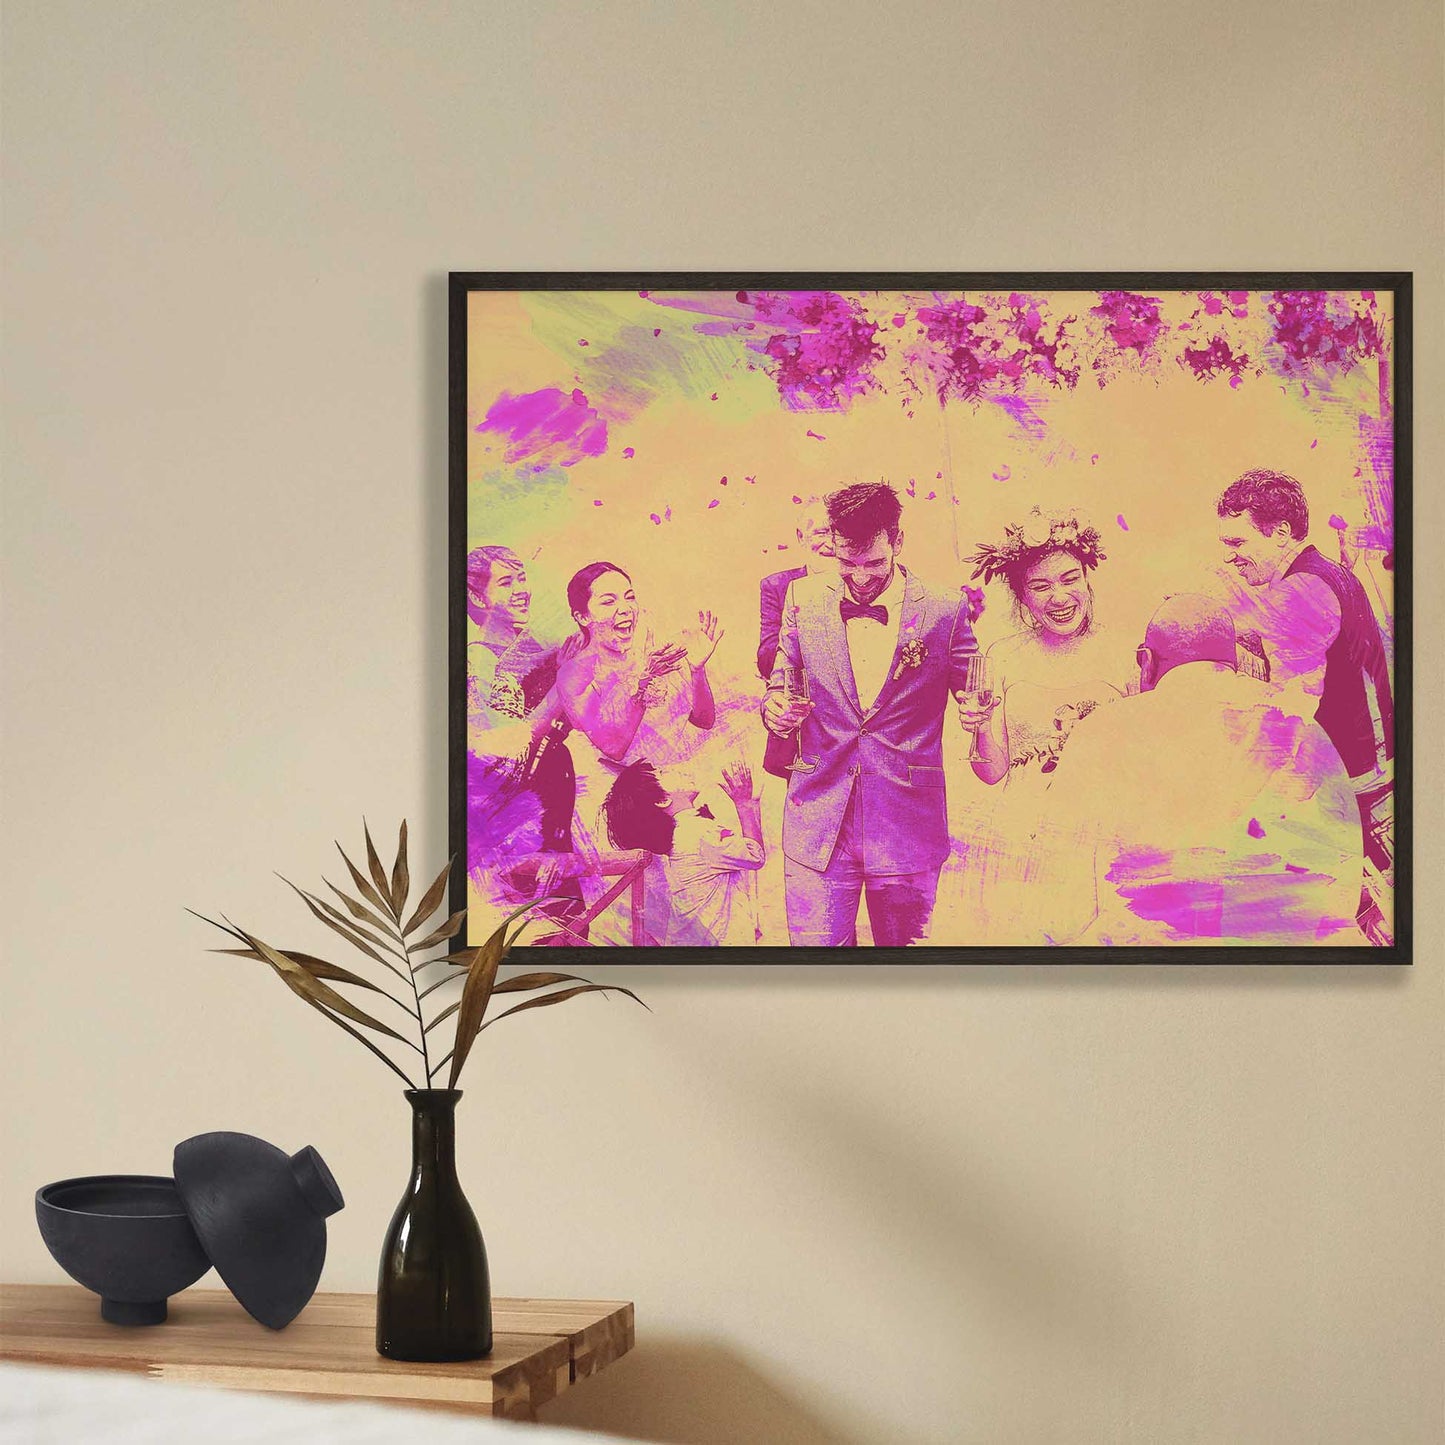 Embellish your walls with the captivating allure of our Personalised Pink & Yellow Watercolor Framed Print. This original and unique artwork, transformed from a photo, features a vibrant and vivid color palette that radiates energy and cheer